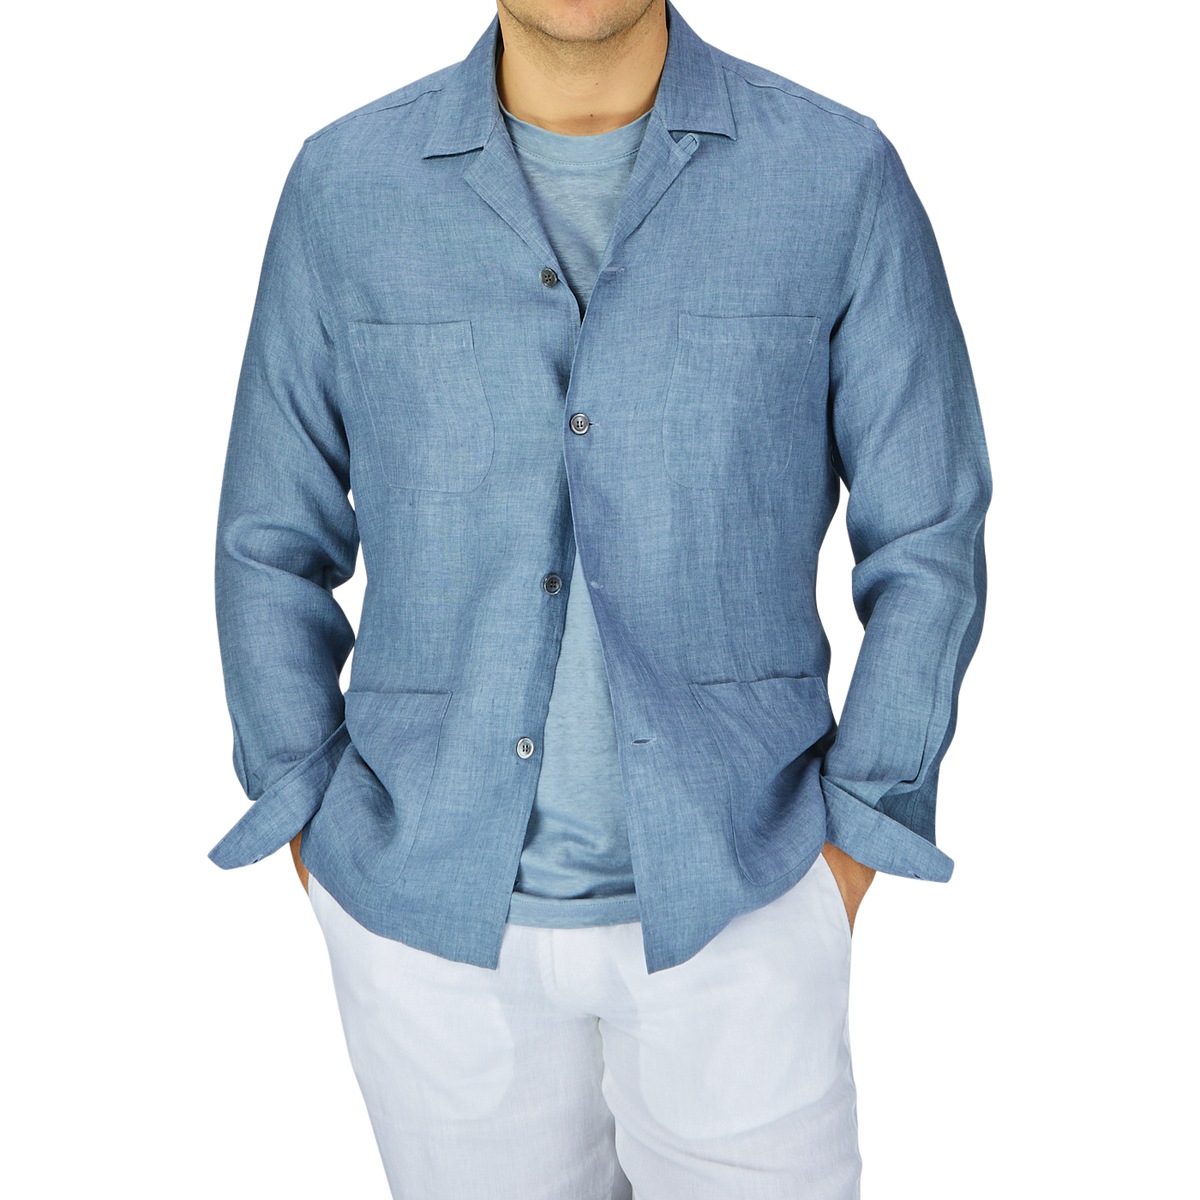 Man wearing a Mazzarelli Indigo Blue Organic Linen Four Pocket Overshirt over a white t-shirt with white pants, against a grey background.